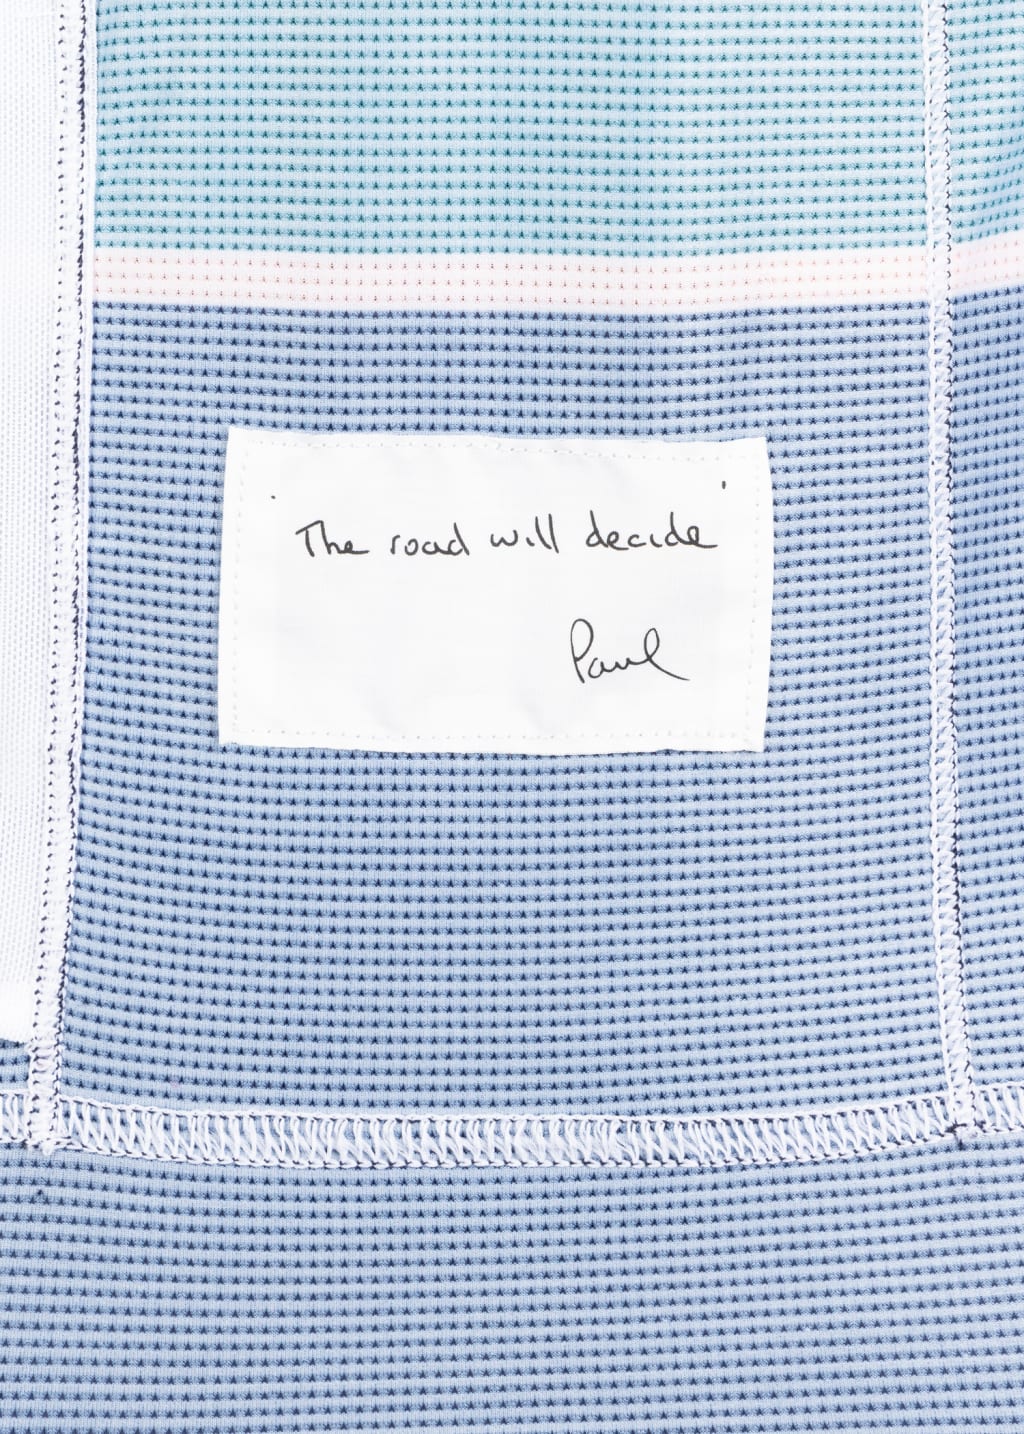 Detail View - Bold Stripe Race Fit Cycling Jersey Paul Smith